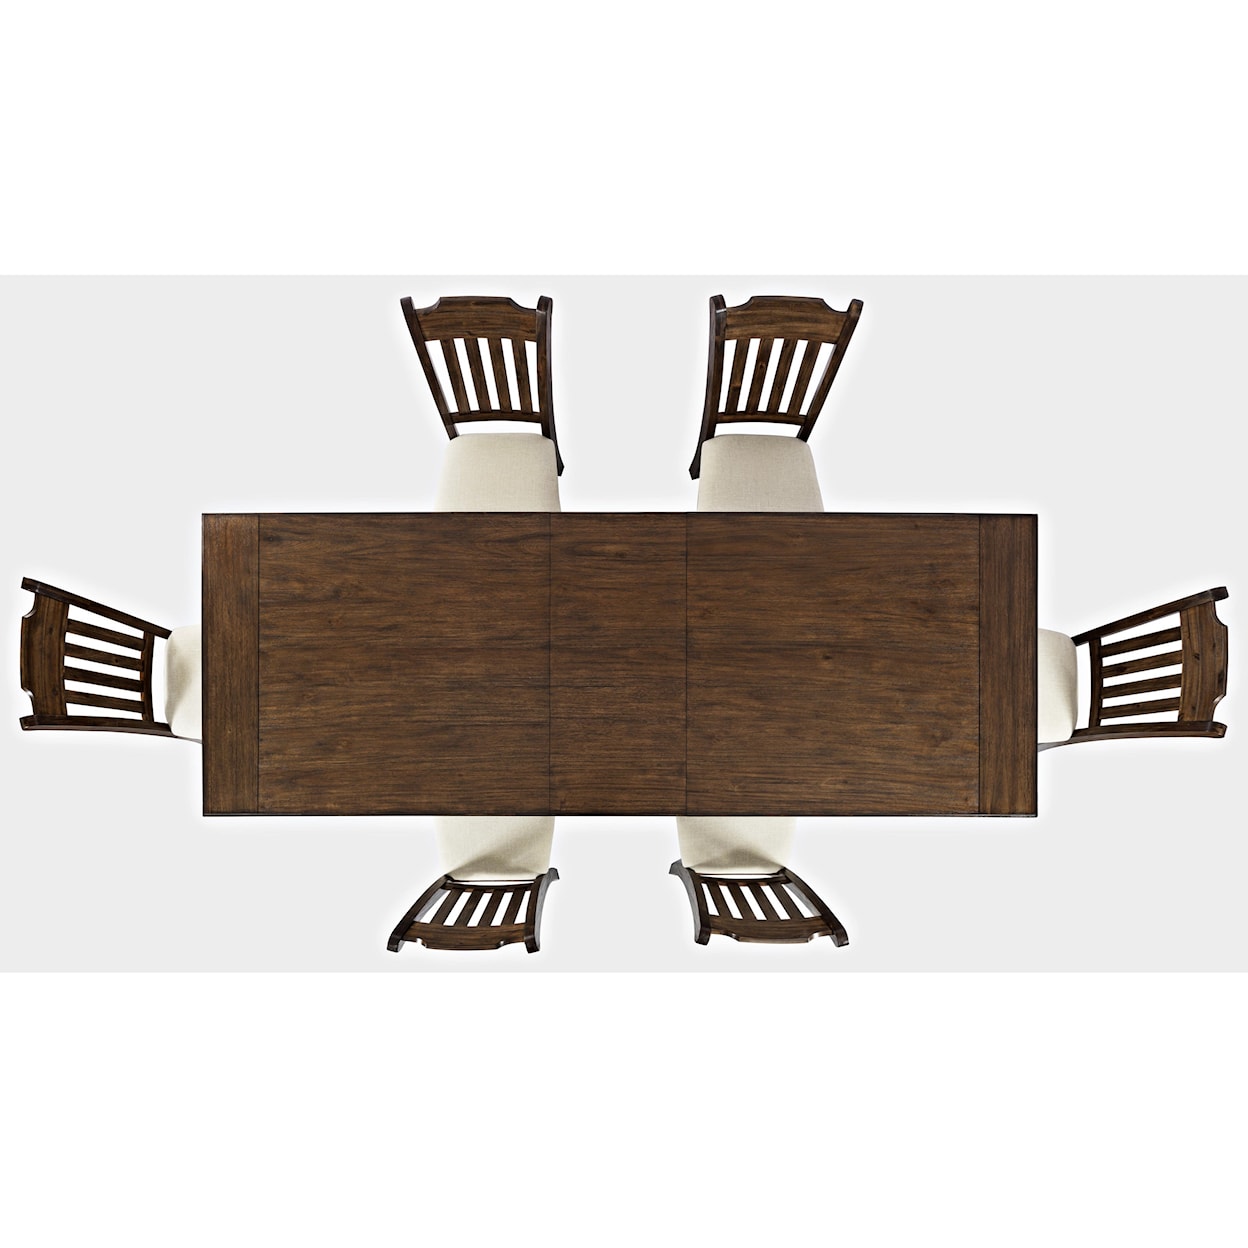 Jofran Bakersfield 7-Piece Dining Table and Chair Set